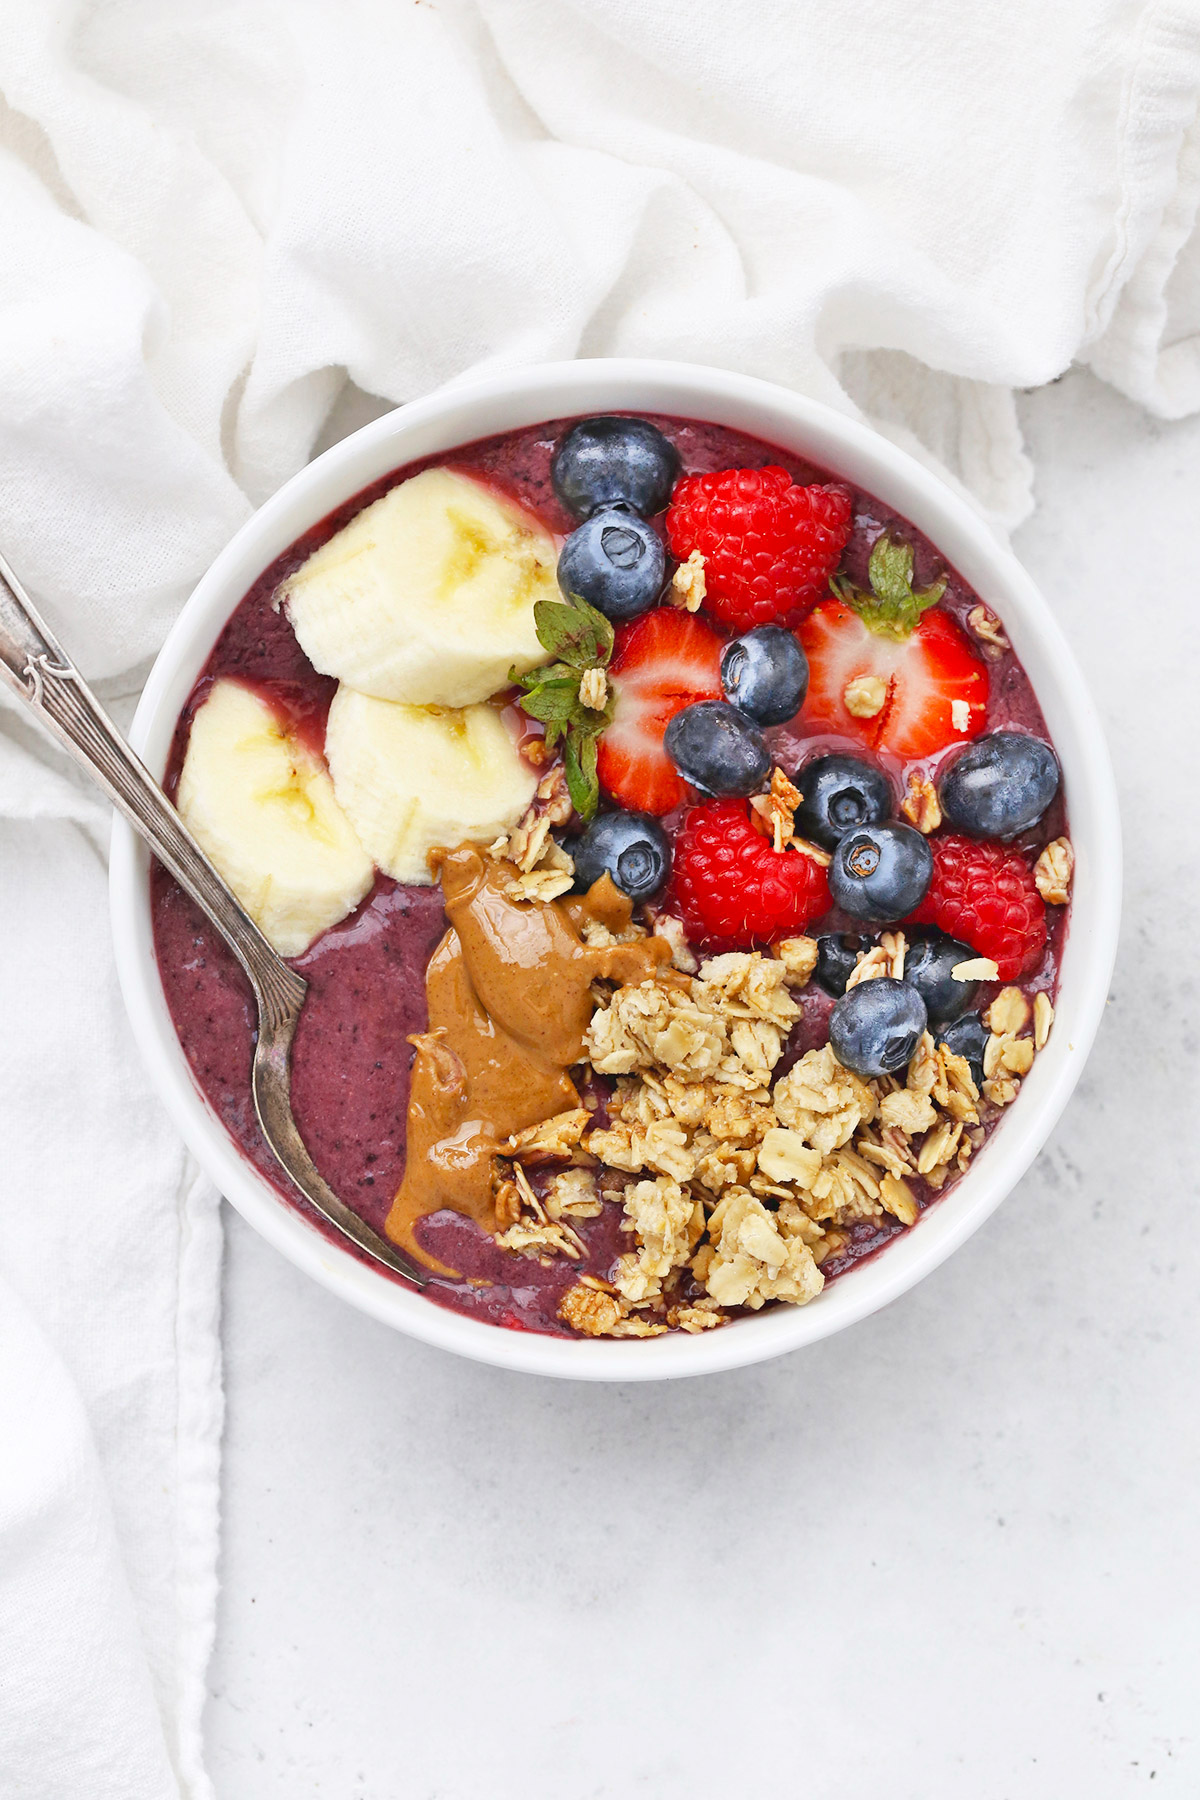 Overhead view of a peanut butter acai bowl topped with fresh berries, peanut butter, granola, and banana slices on a white background